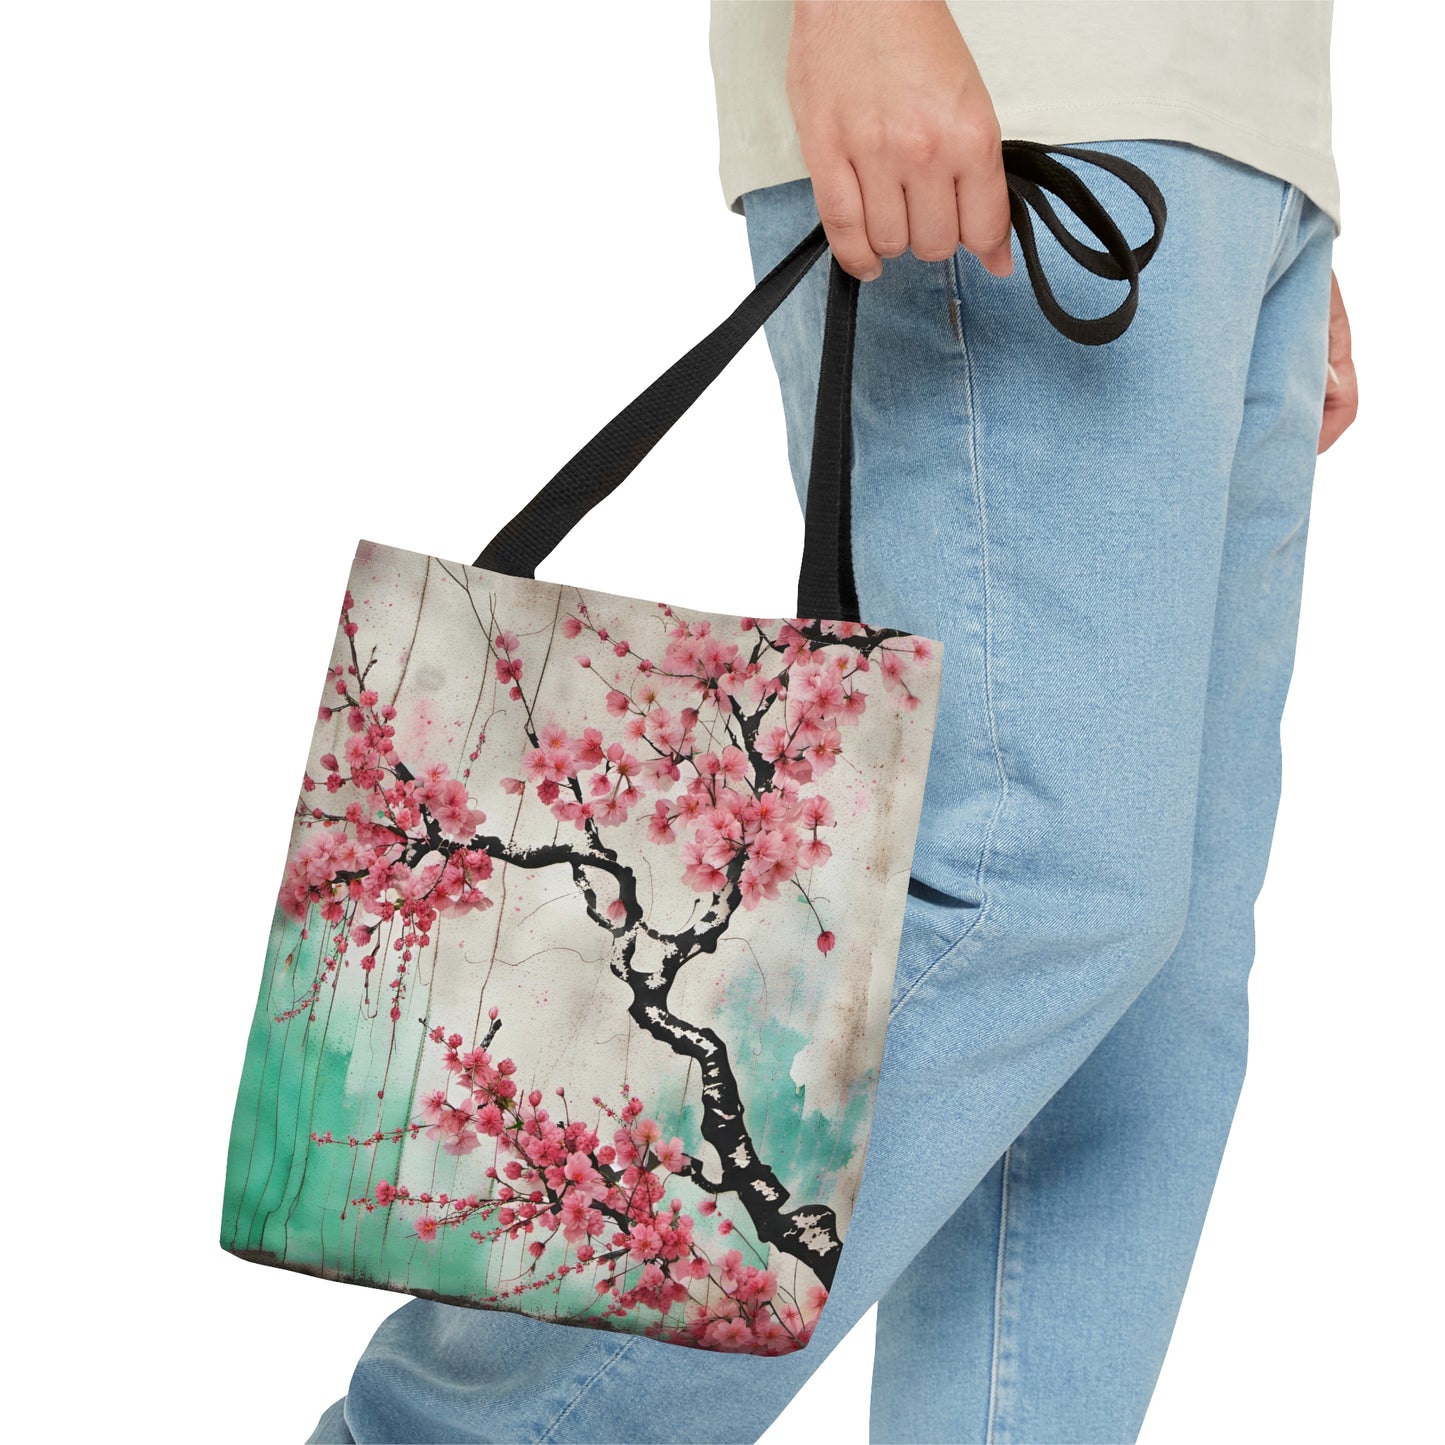 Floral Themed Bags and Travel Accessories - Street Style Cherry Blossoms Printed on Tote Bag